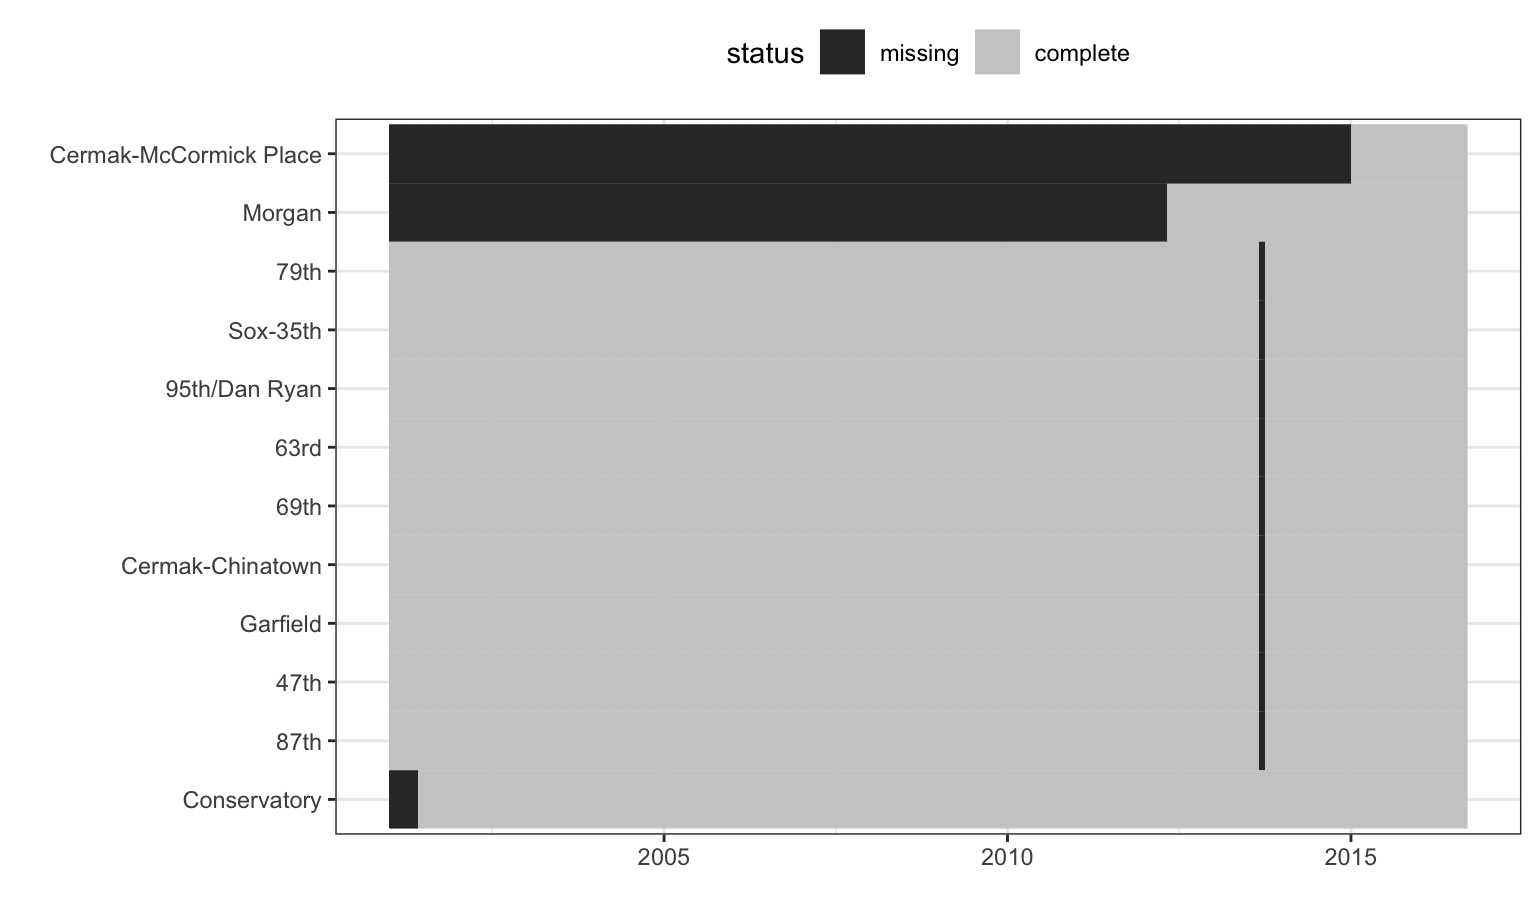 Missing data patterns for stations originally in the Chicago ridership data.